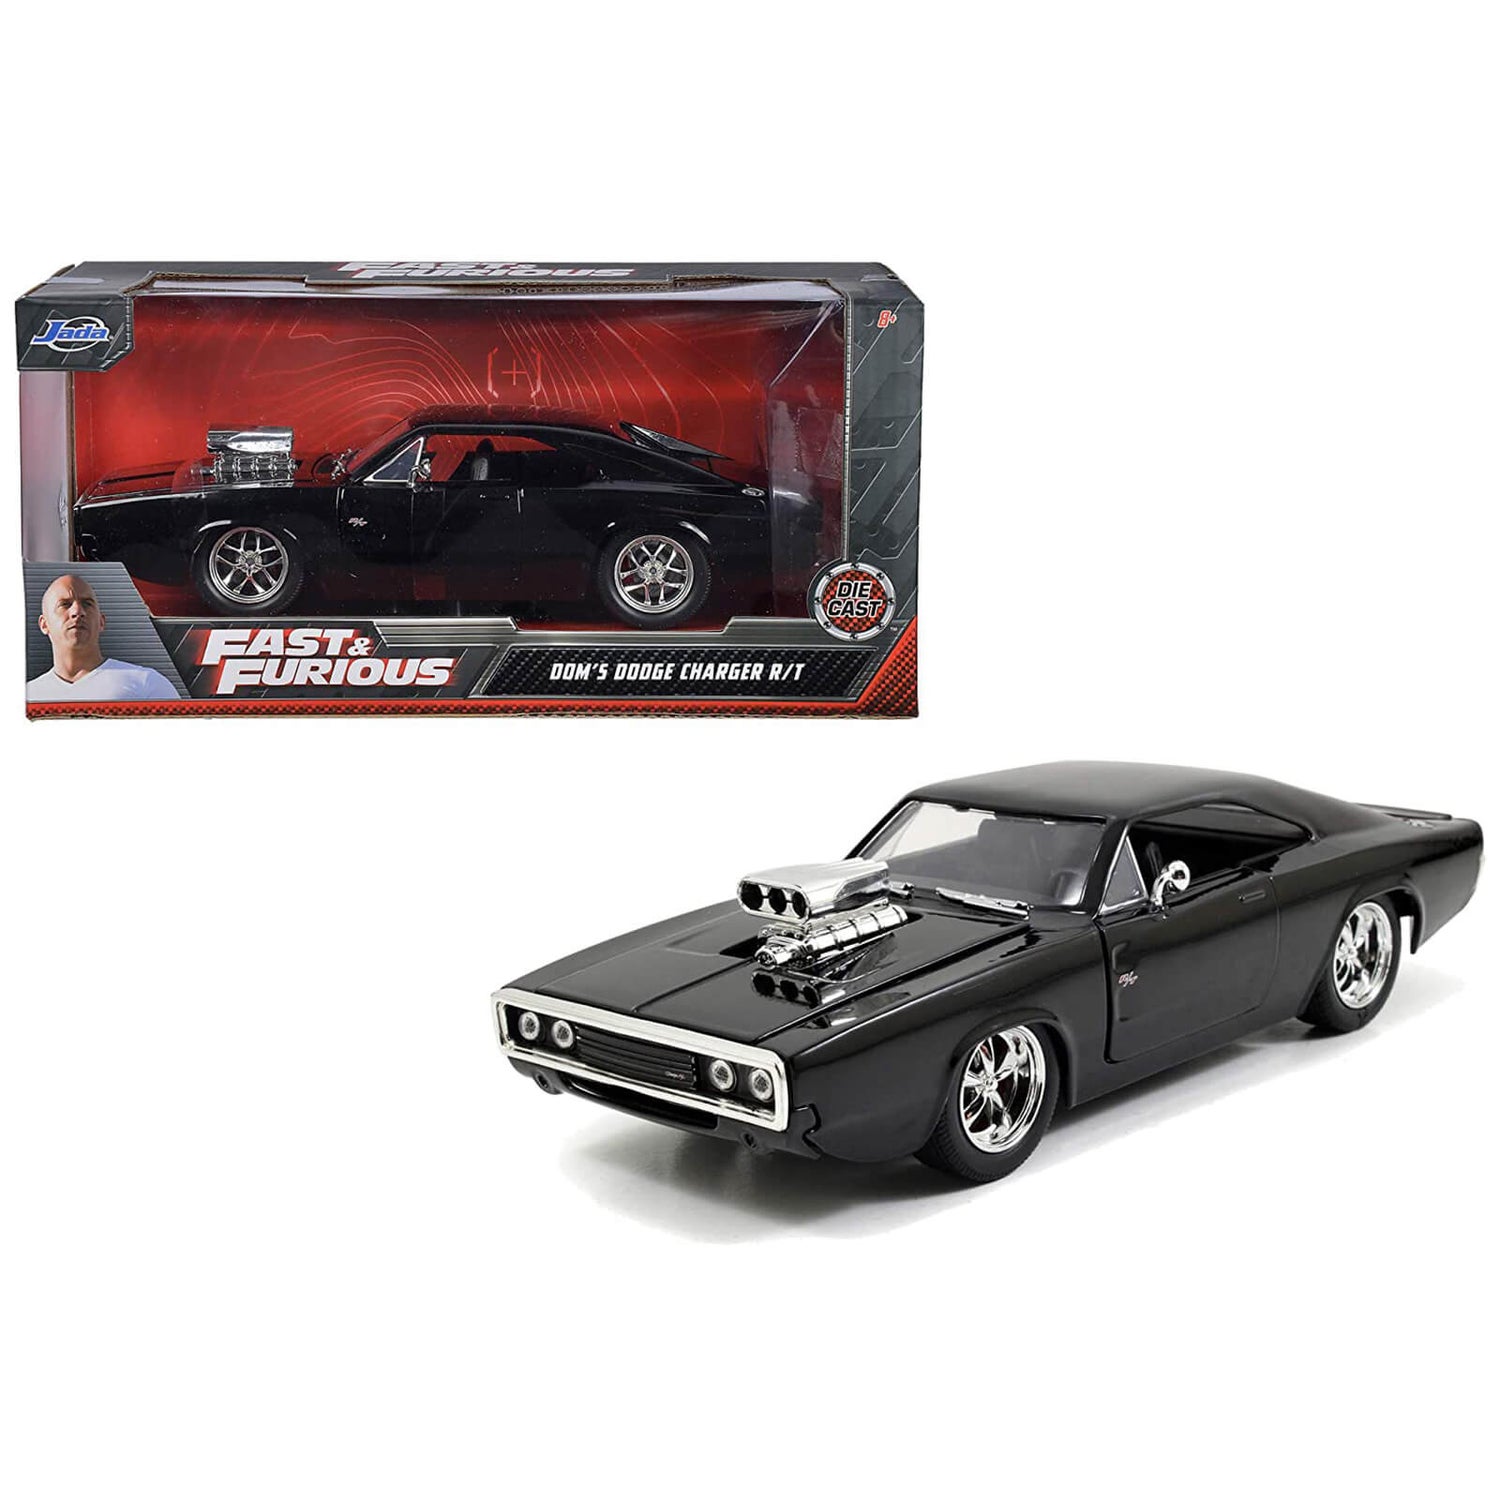 Jada Toys Fast & Furious Dodge Charger (Street) 1:24